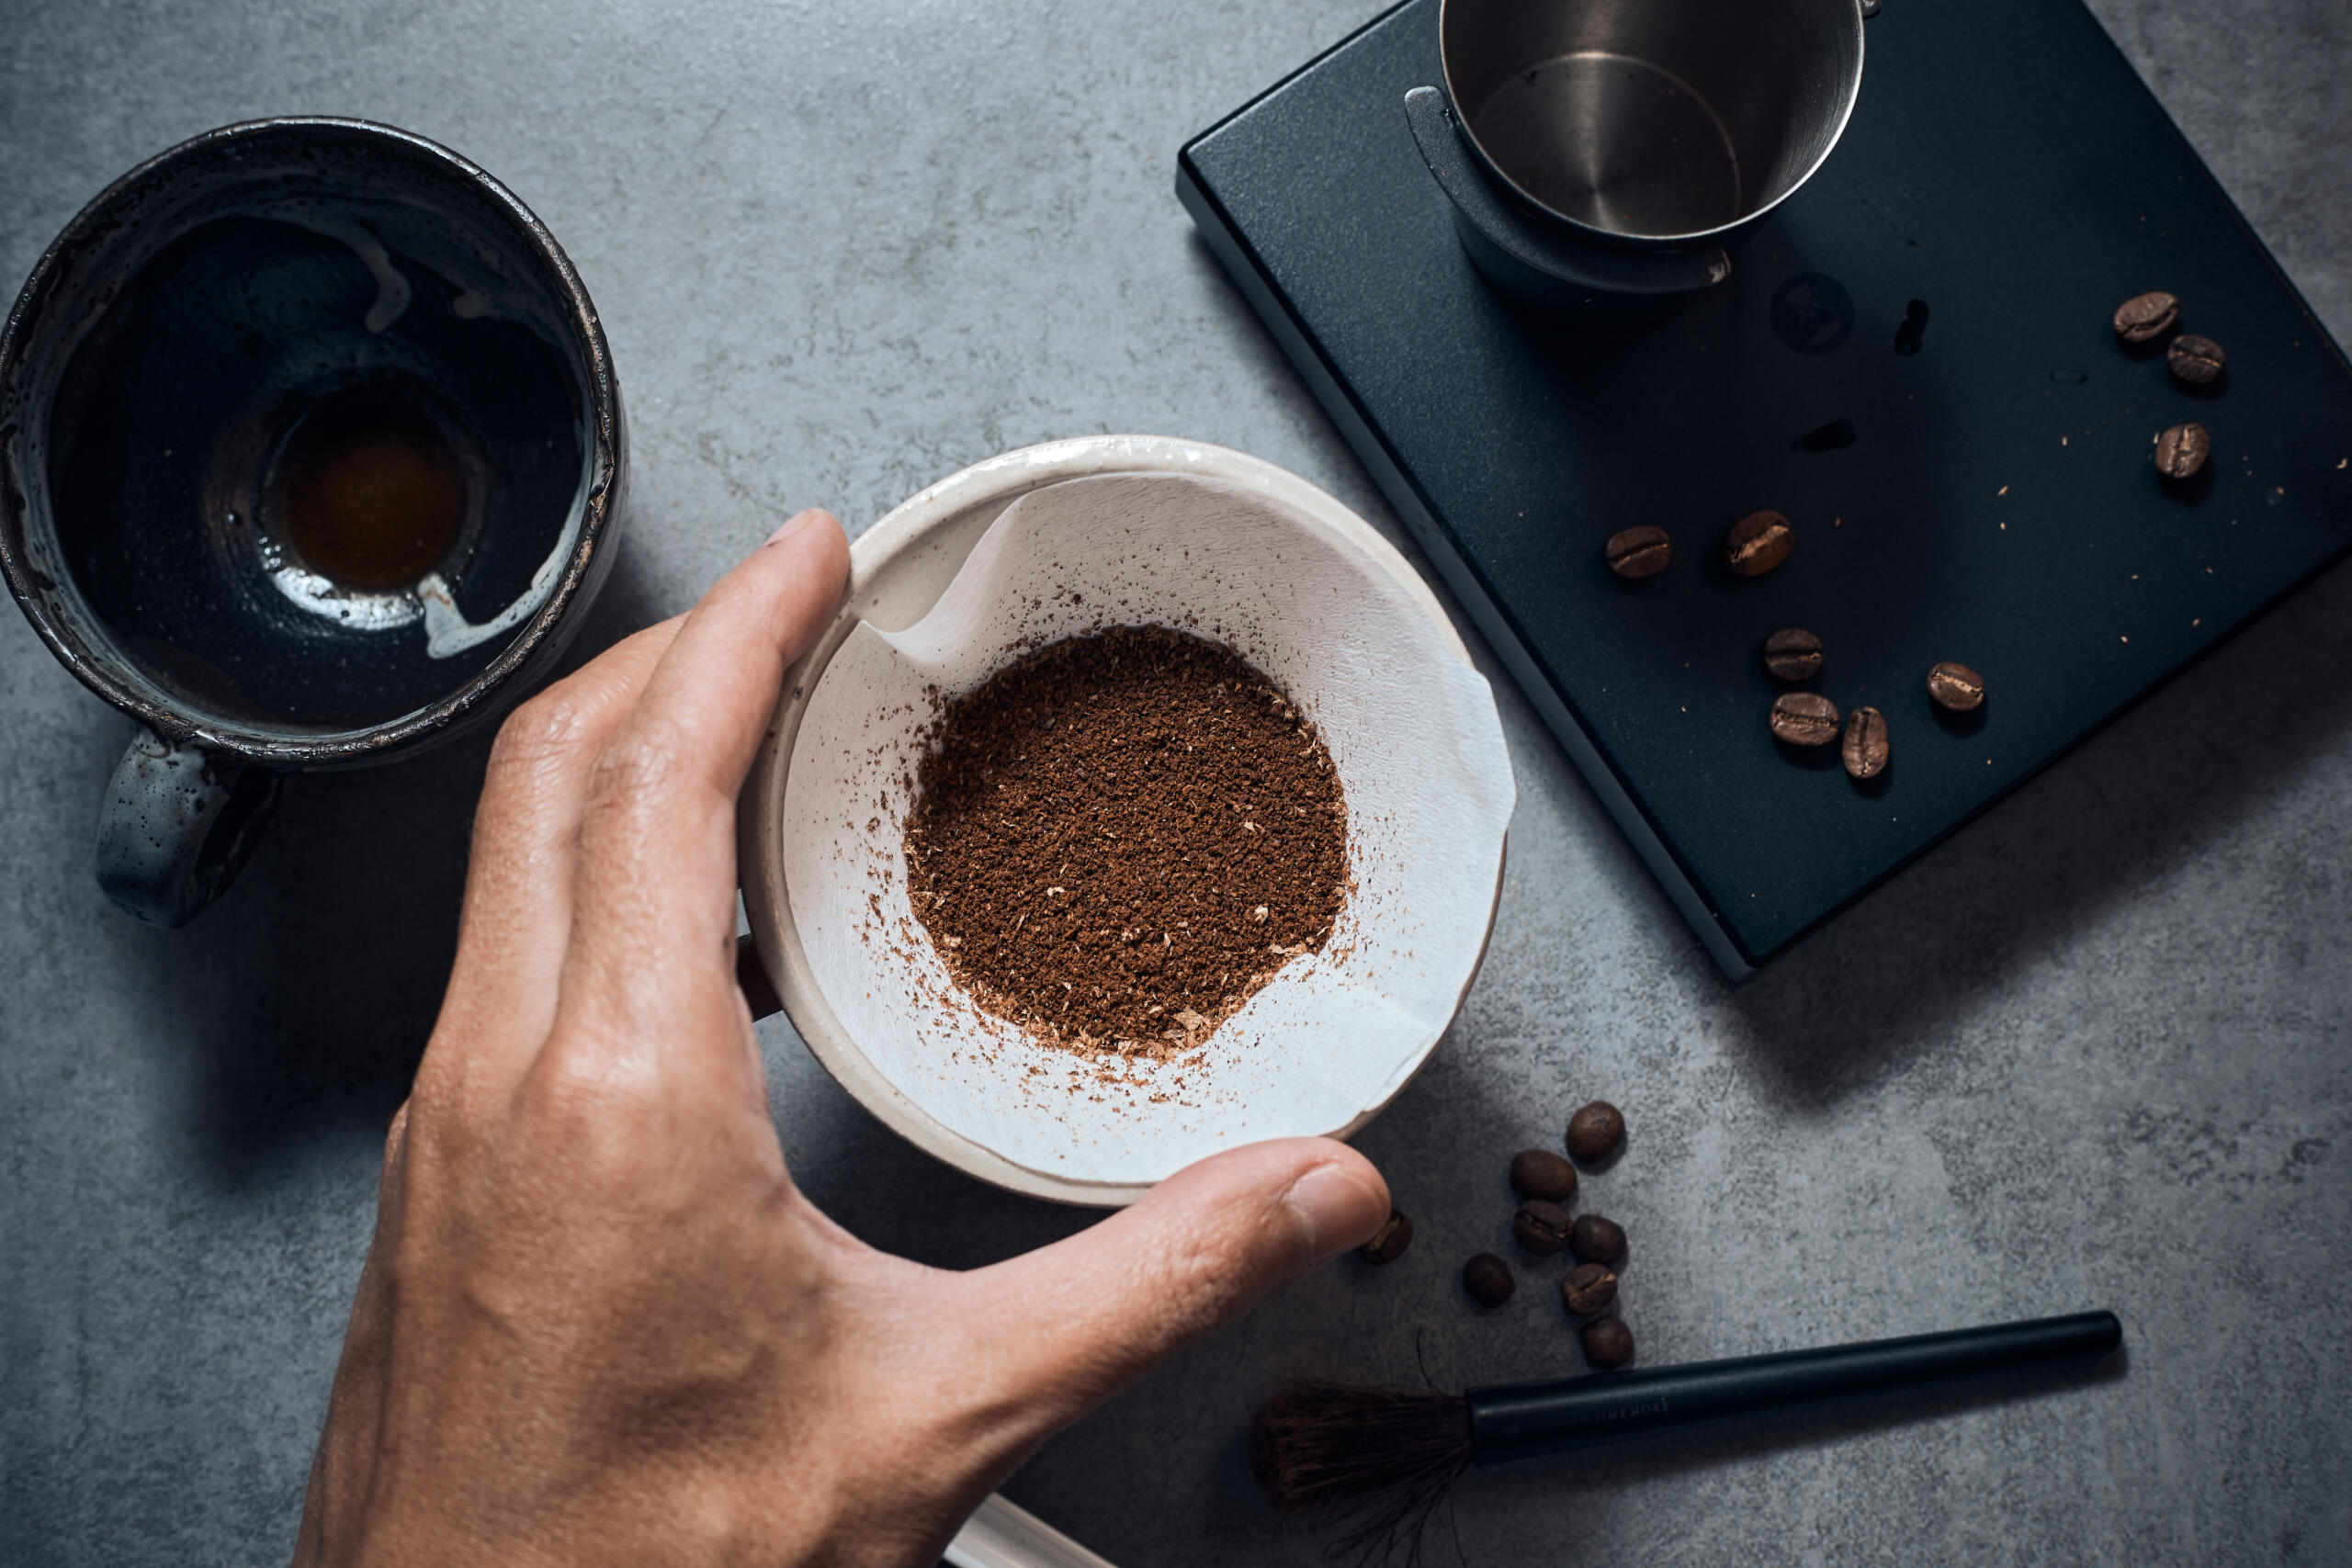 How to Calculate Water Loss During Brewing Coffee